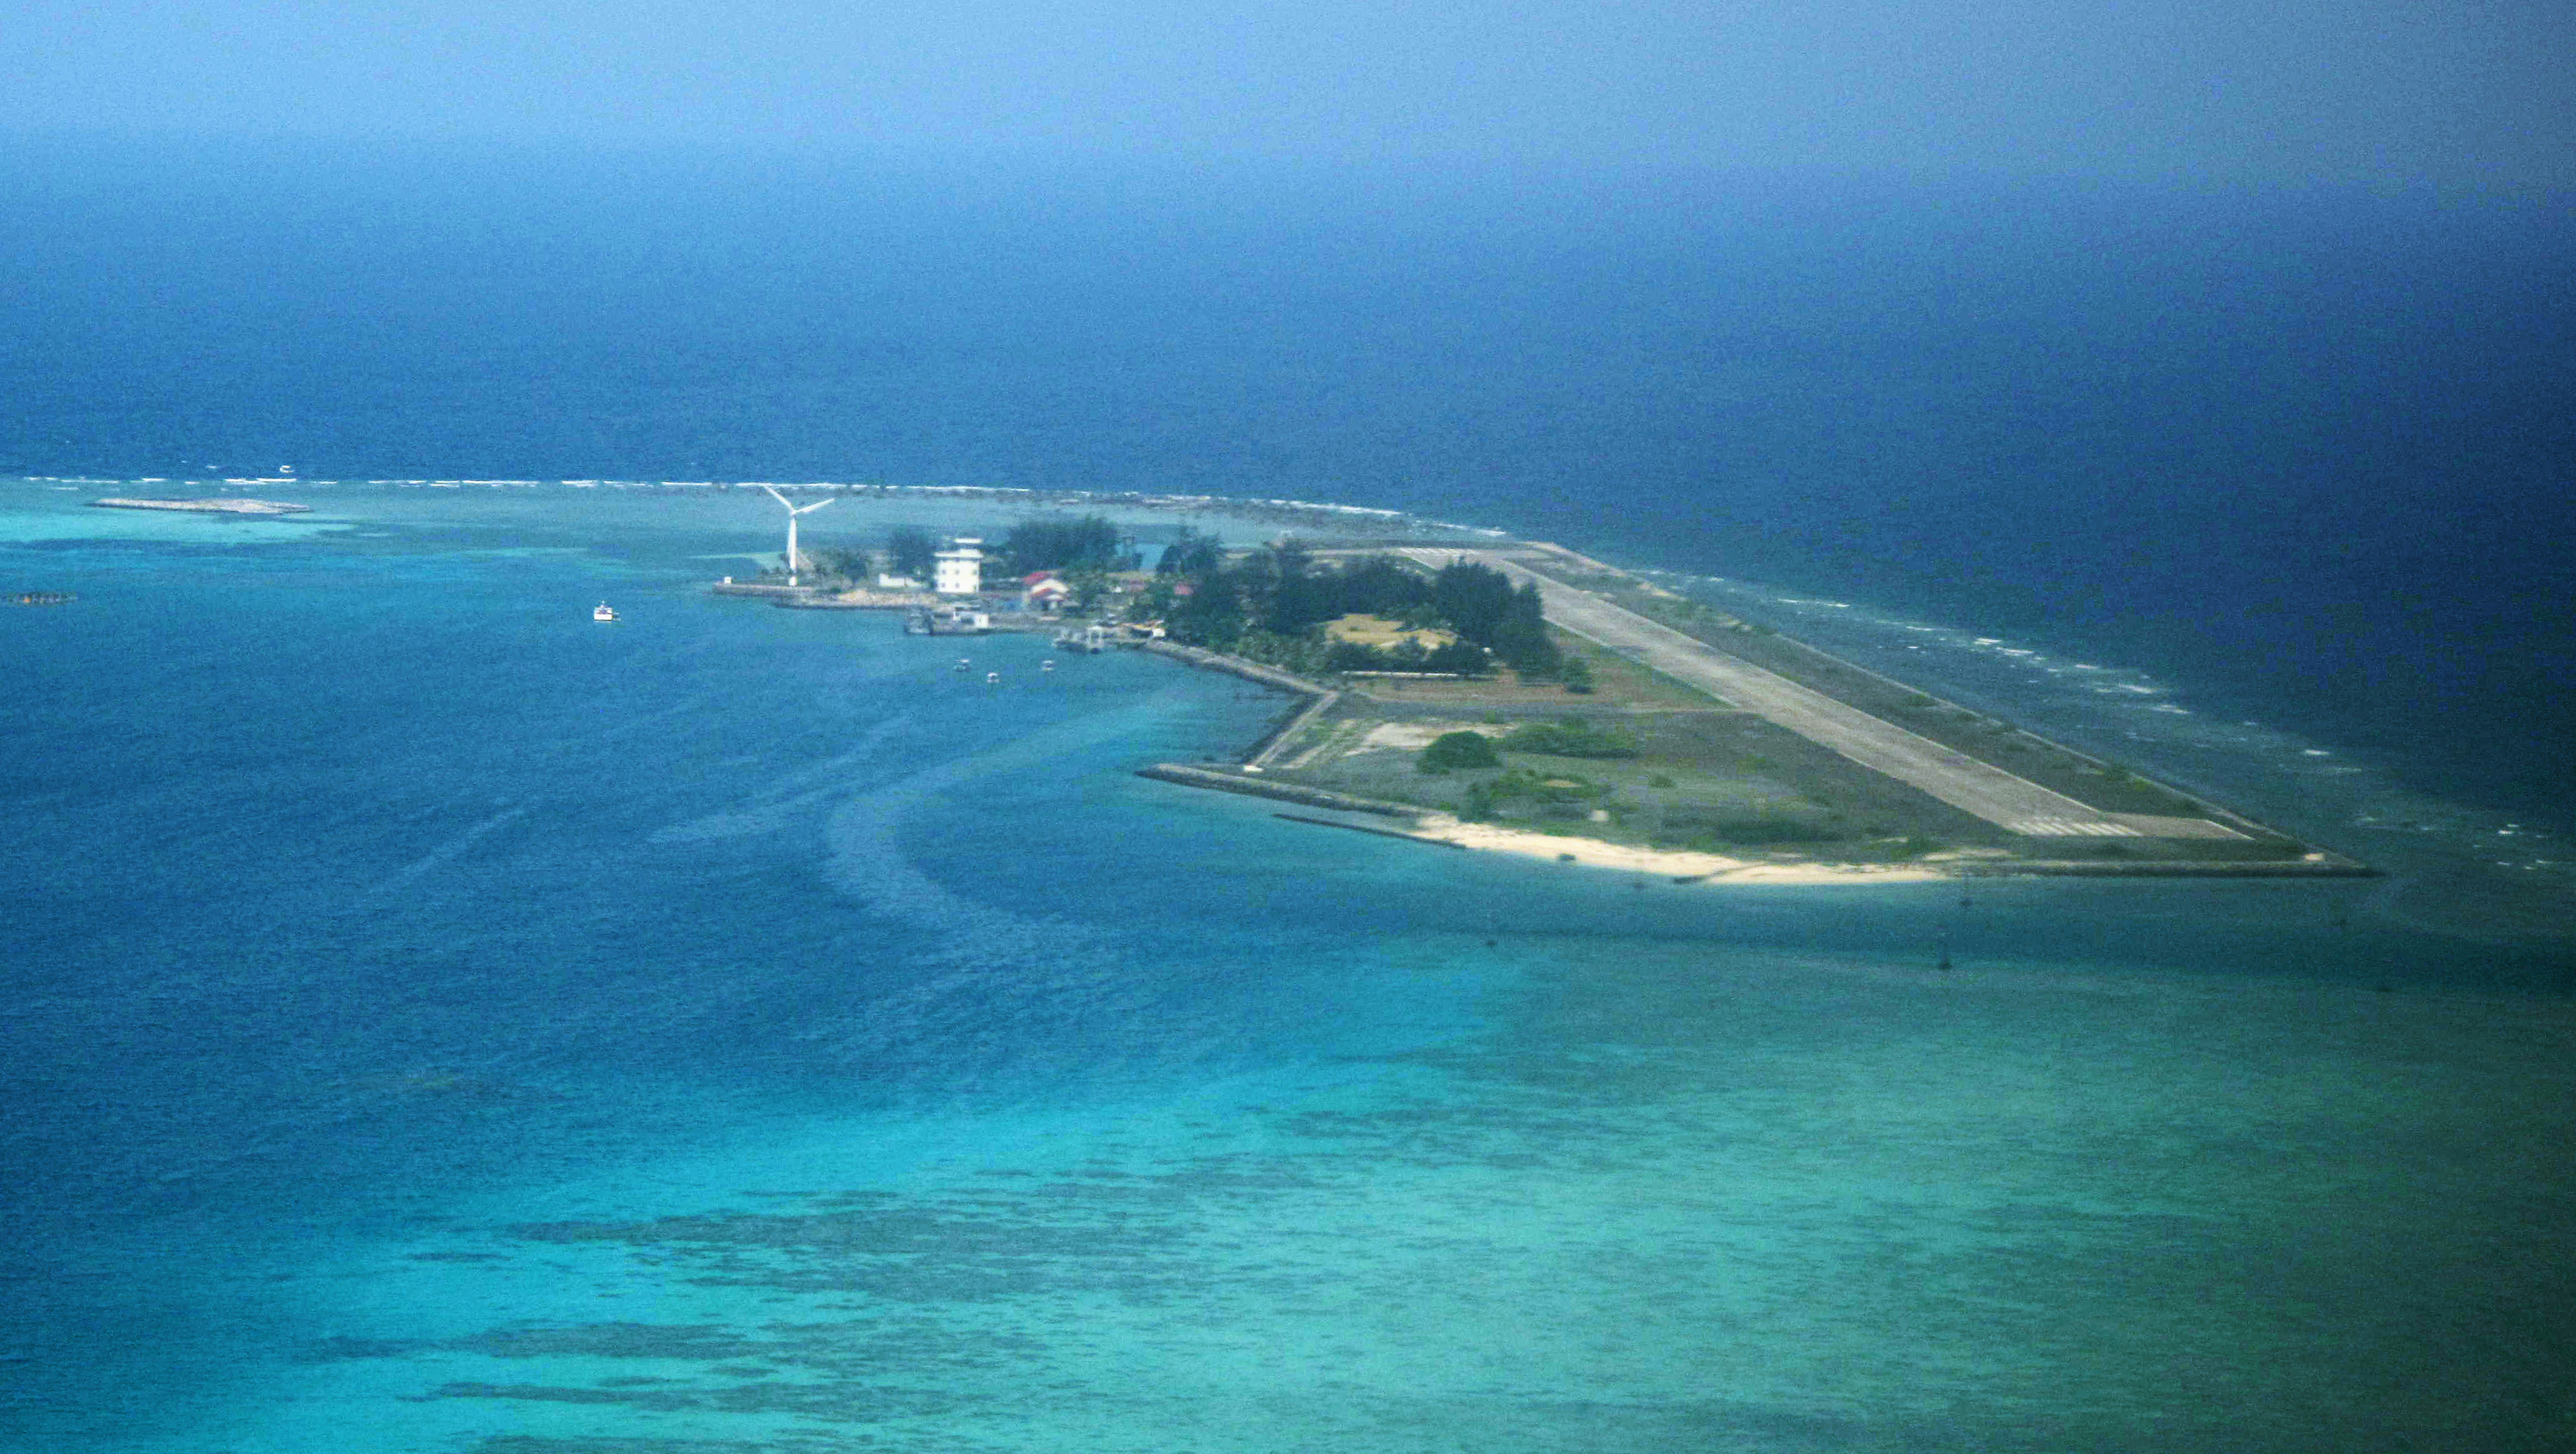 An aerial view of the Malaysian-occupied island of Layang Layang, in the South China Sea April 1, 2010. Layang Layang island, a deep sea atoll off the coast of Sabah, is part of the 600 islands, reefs and shoals in the South China Sea known as the Spratlys. © David Loh via Reuters